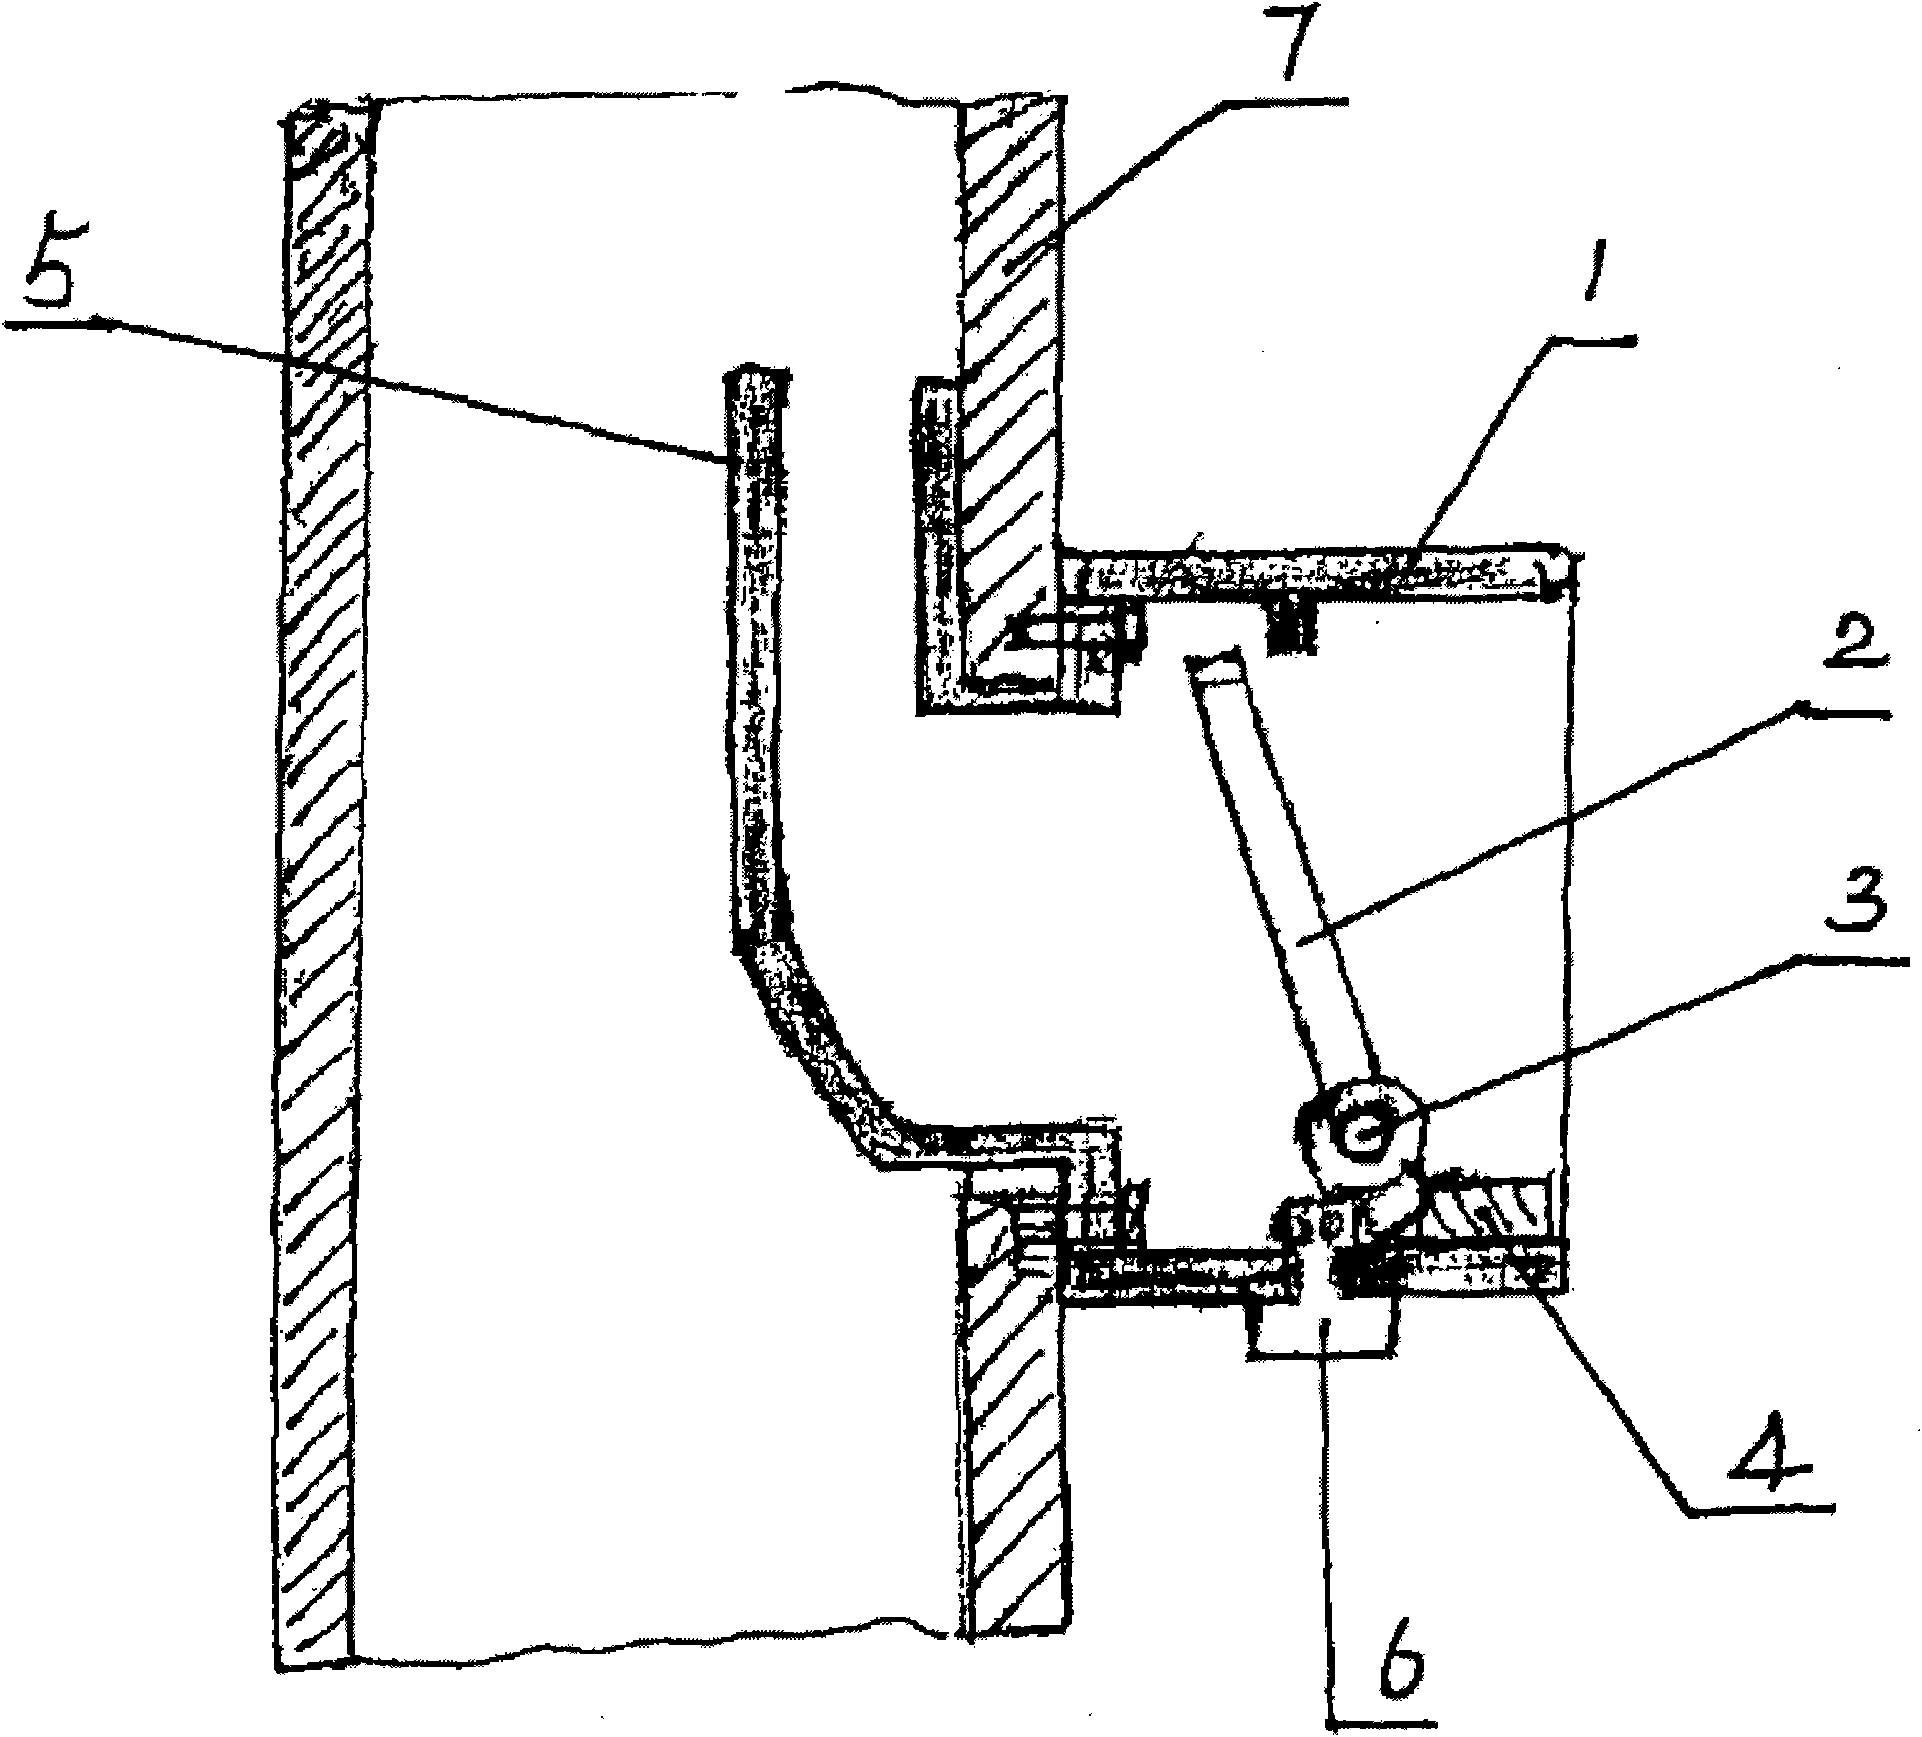 Valve device for exhaust duct